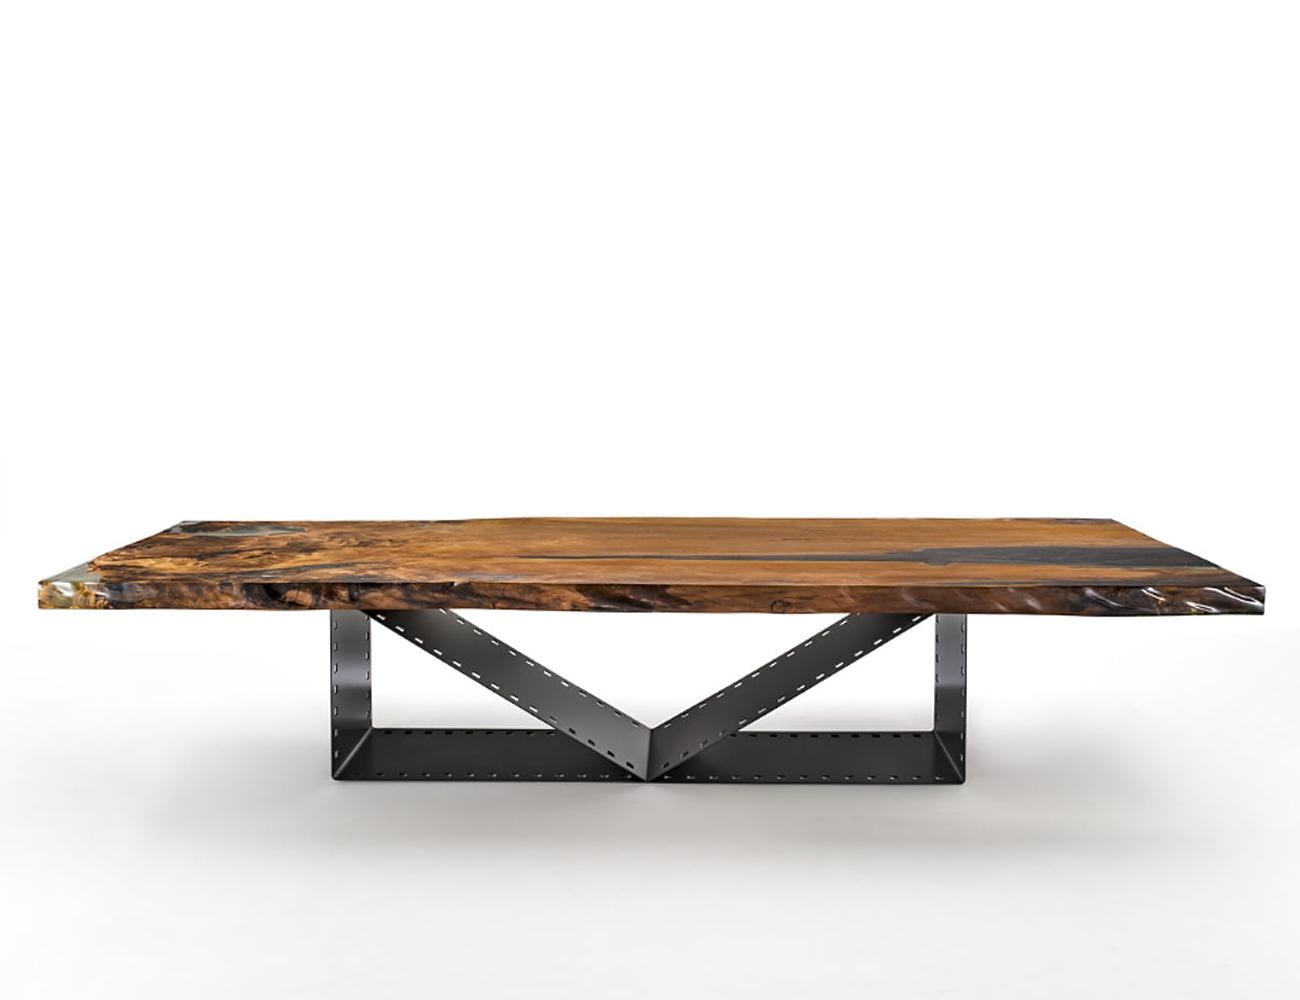 Dining table film roll kauri with iron base
forged like a film roll and with a solid kauri
wood top with high quality resin.
Exceptional piece.